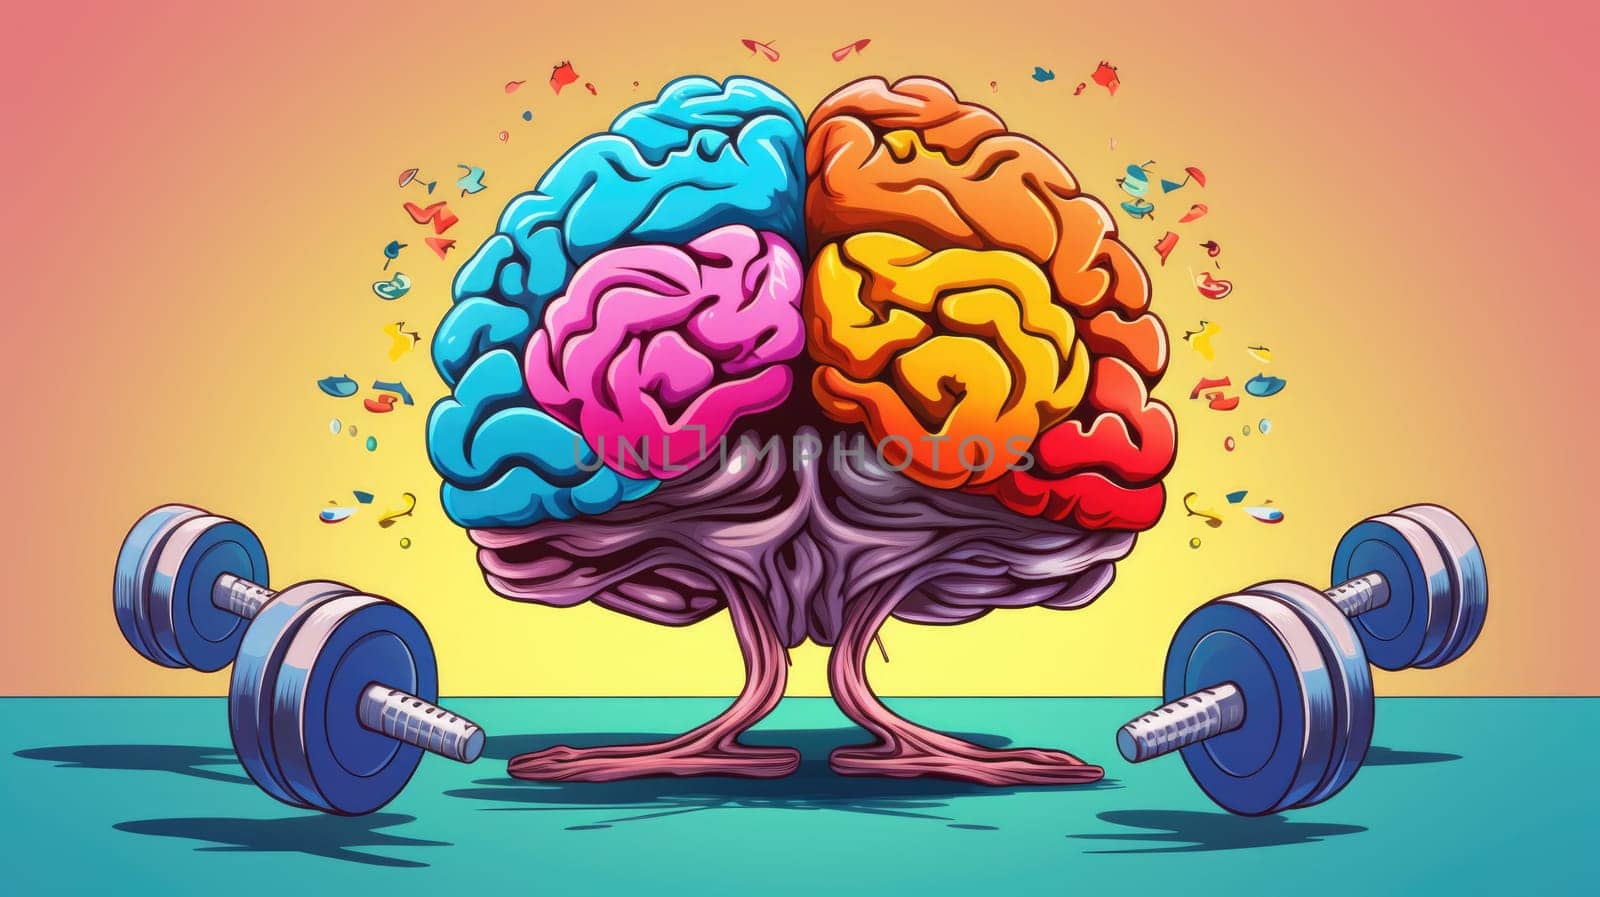 An illustrated drawing of a brain with dumbbells positioned in front of it, representing the concept of brain training and mental fitness.